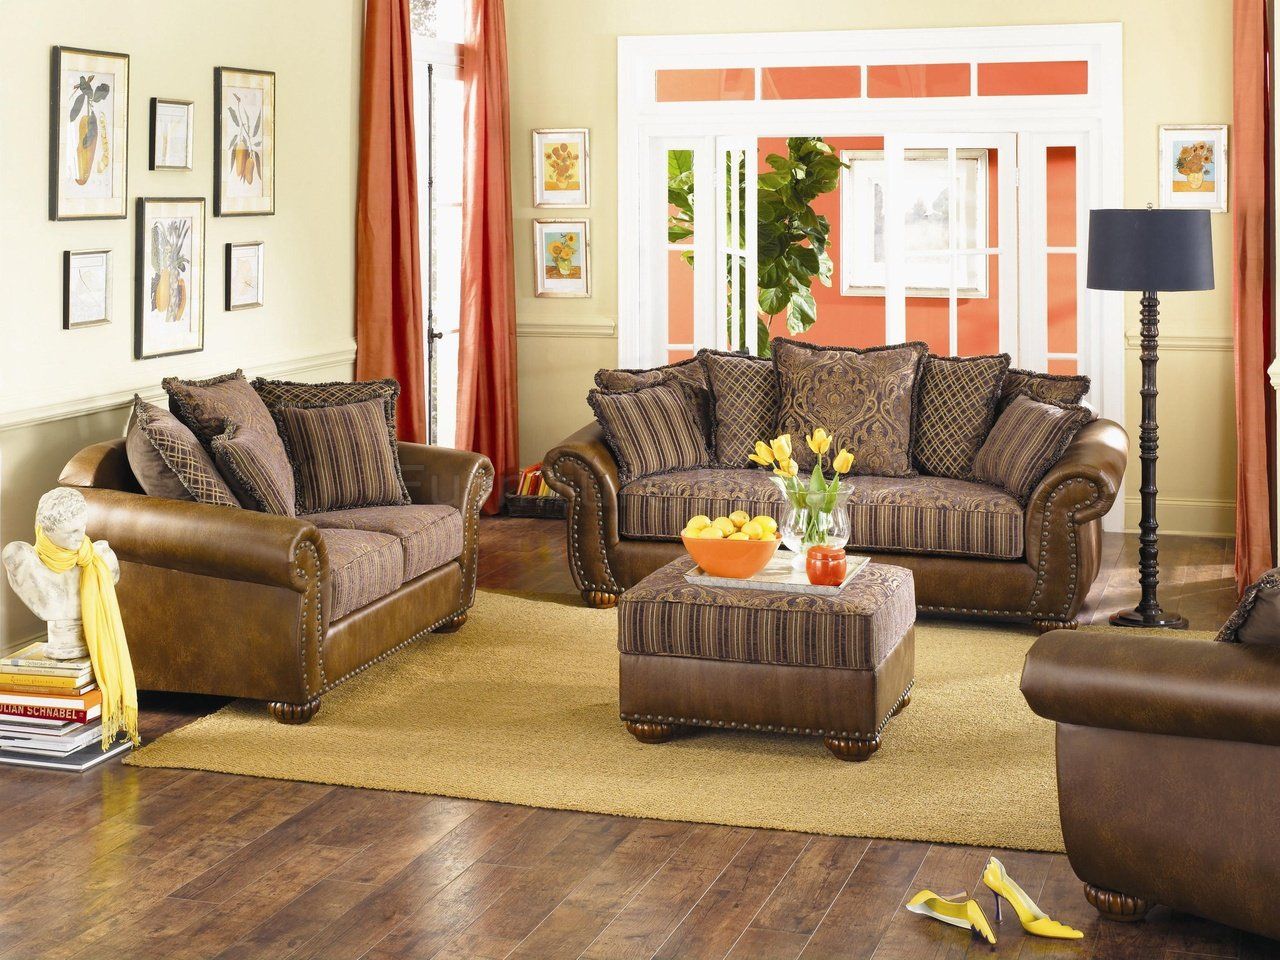 Standard Classic Sofas Furniture for Living Room